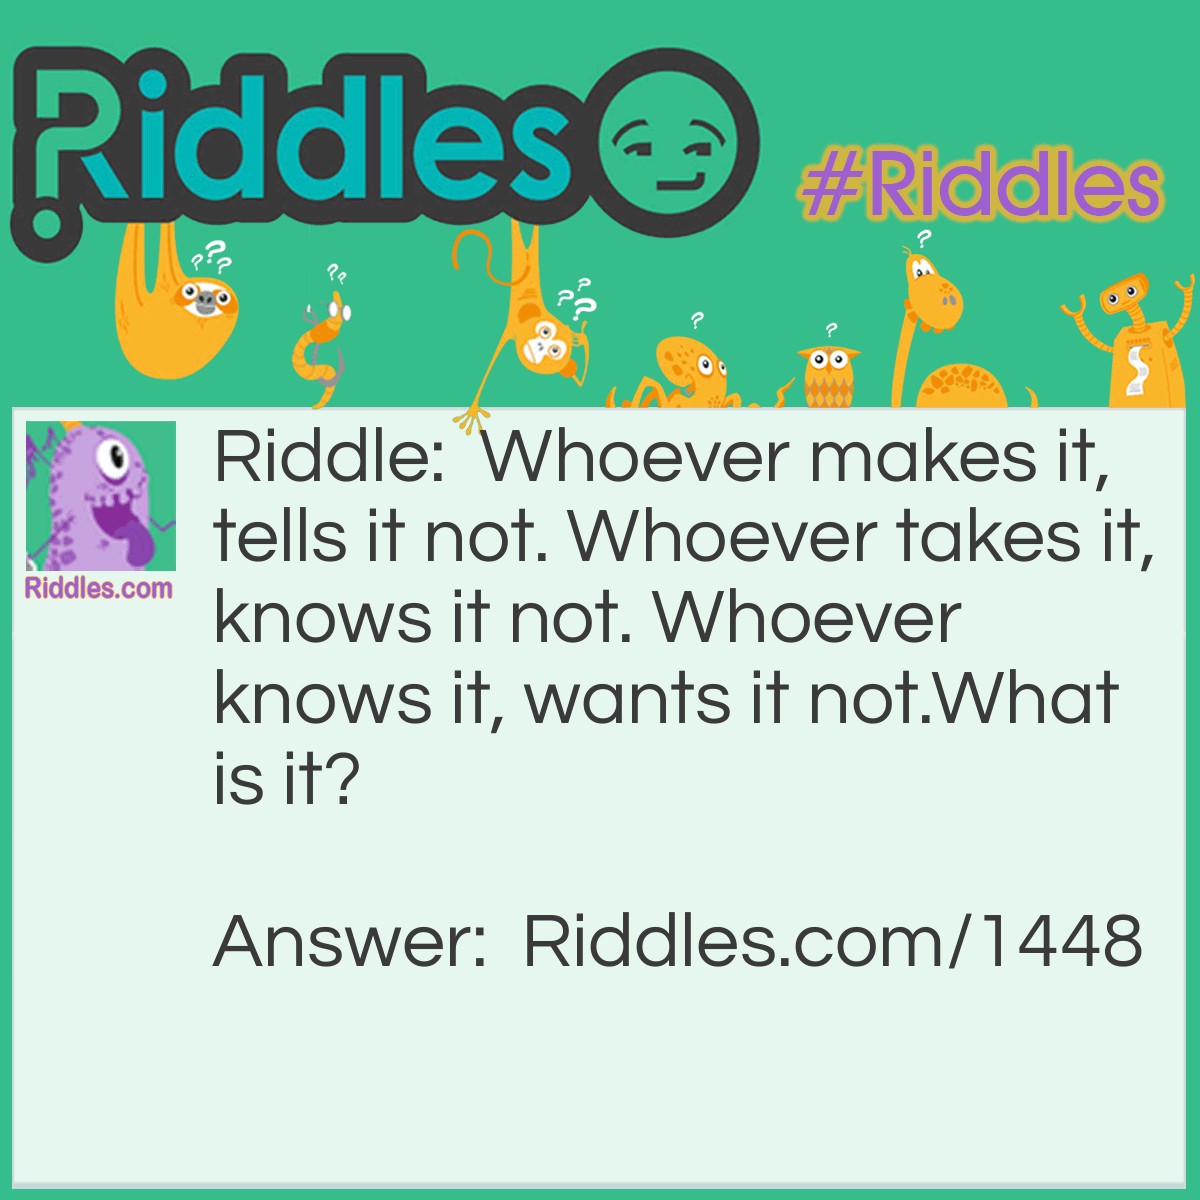 Riddle: Whoever makes it, tells it not. Whoever takes it, knows it not. Whoever knows it, wants it not.
What is it? Answer: Counterfeit money.